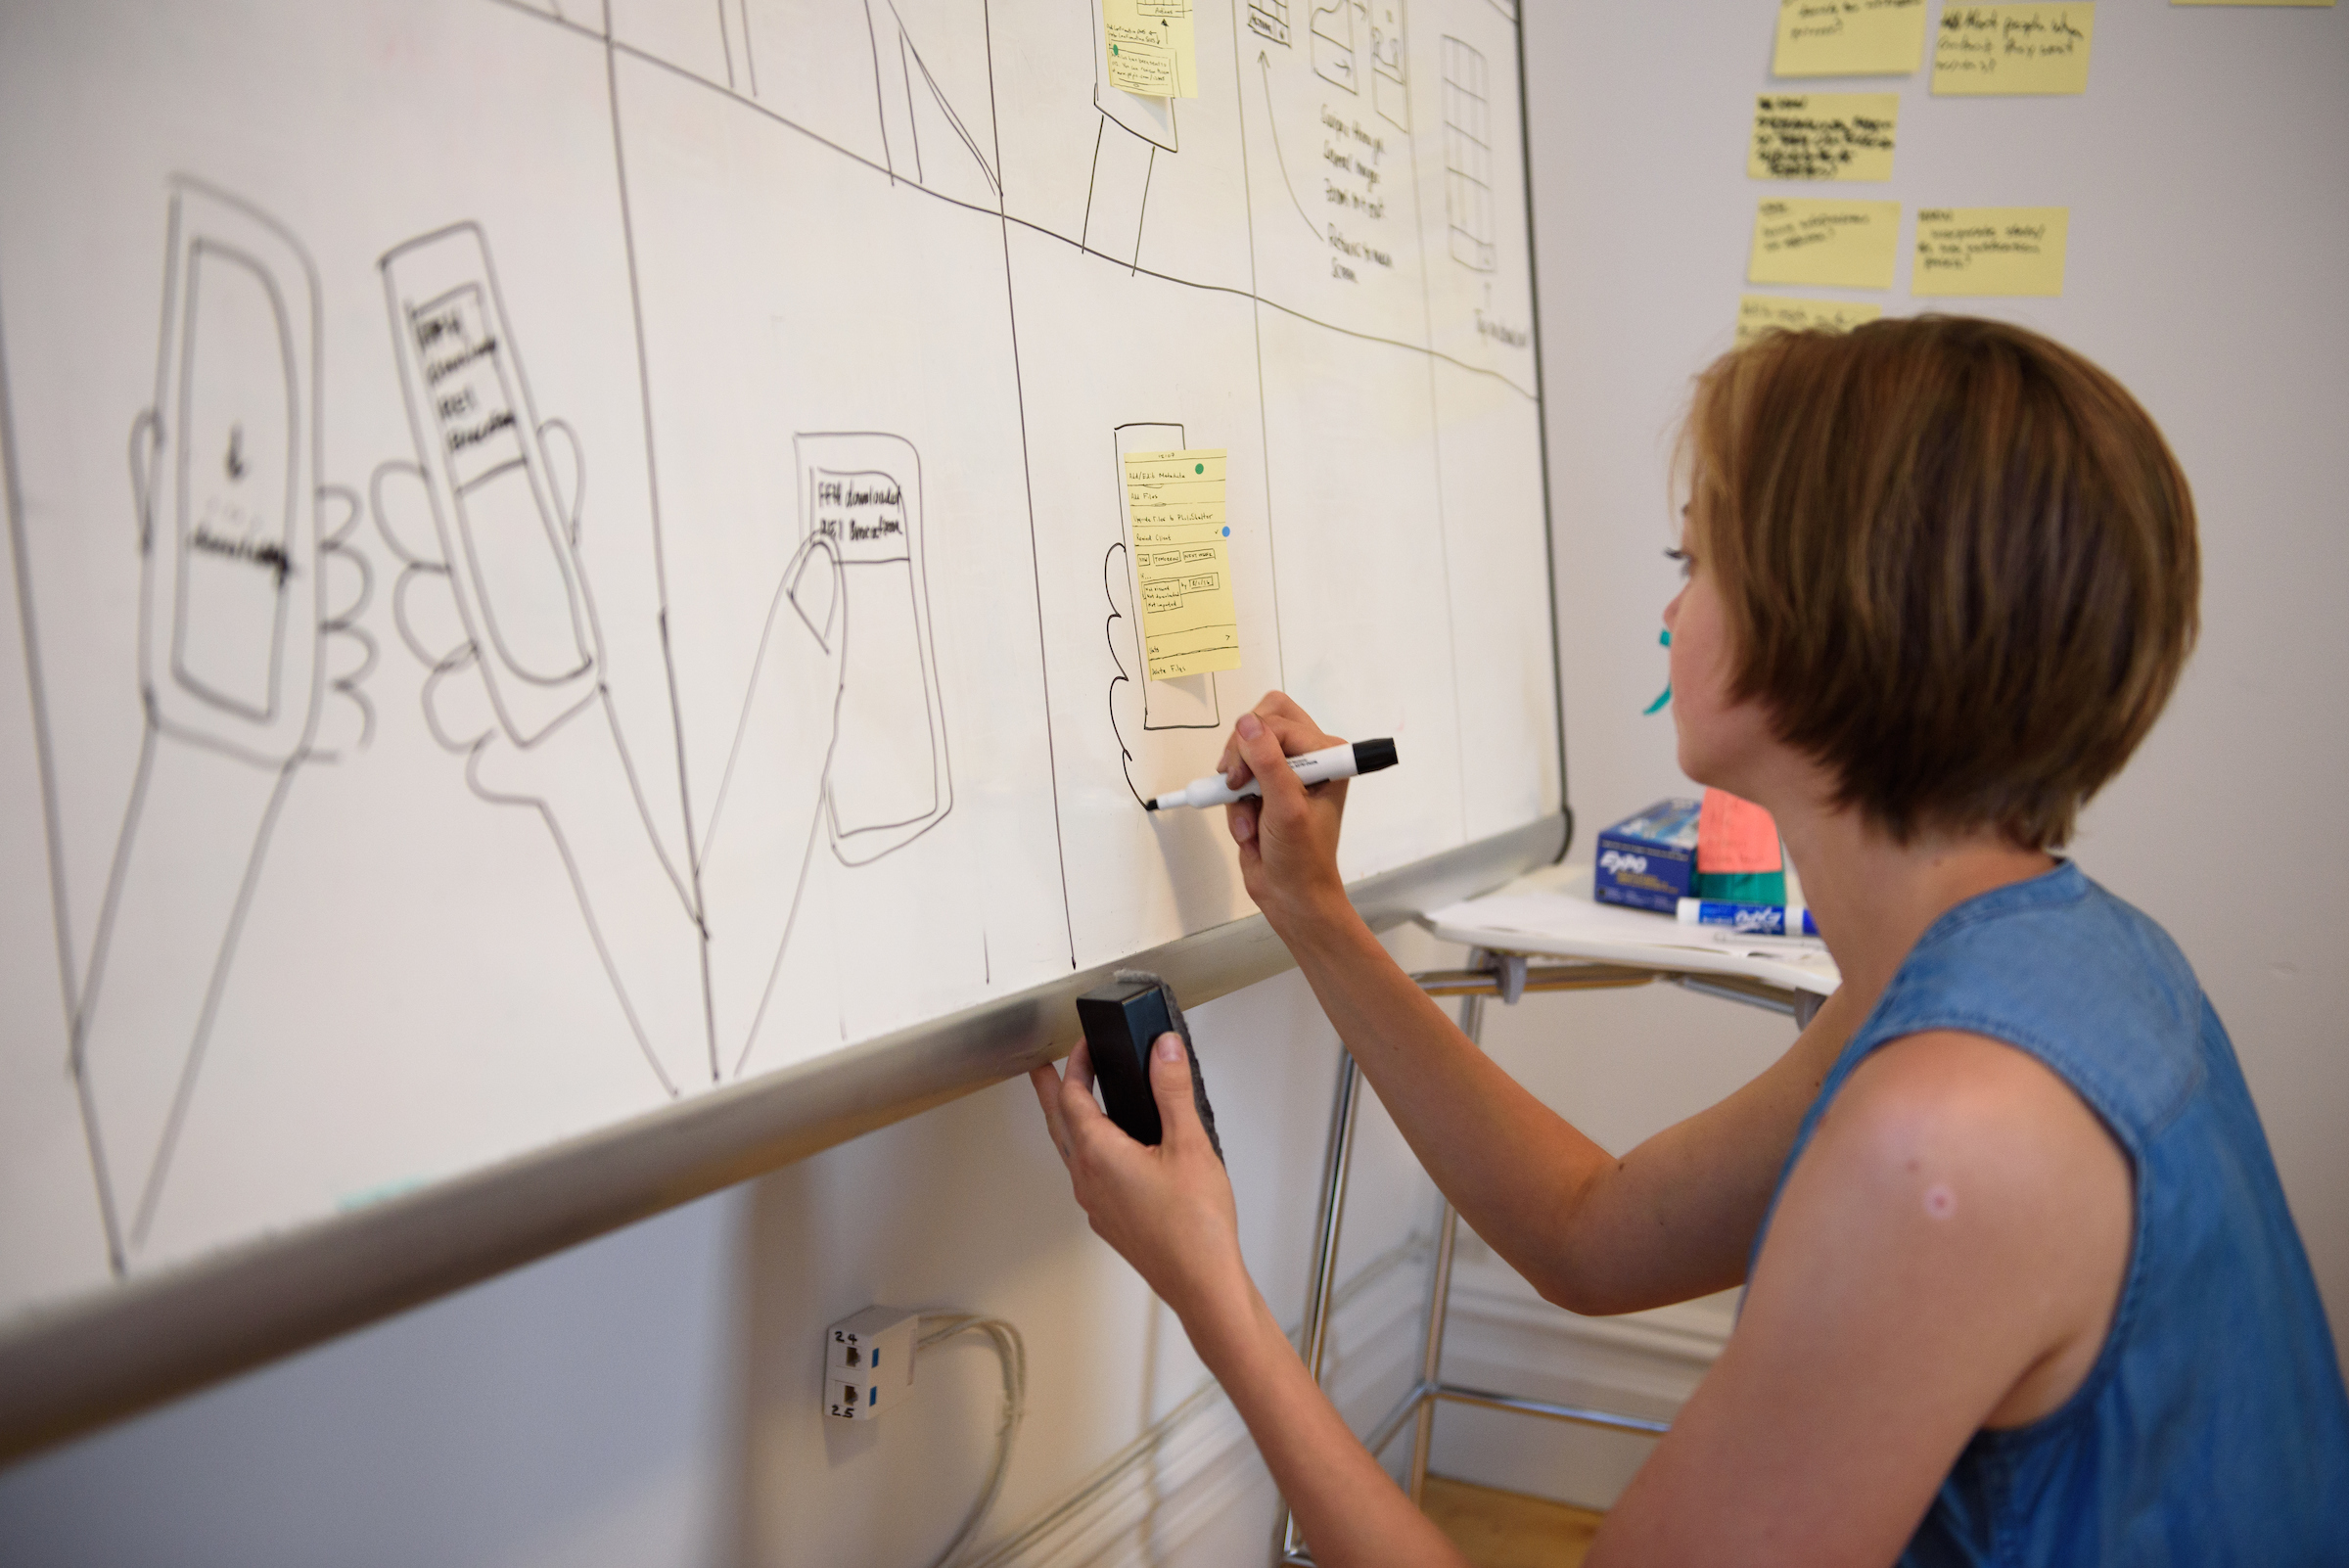 Kim Burgas drawing a hand on a whiteboard. The whiteboard is covered in storyboard illustrations and a sticky note.